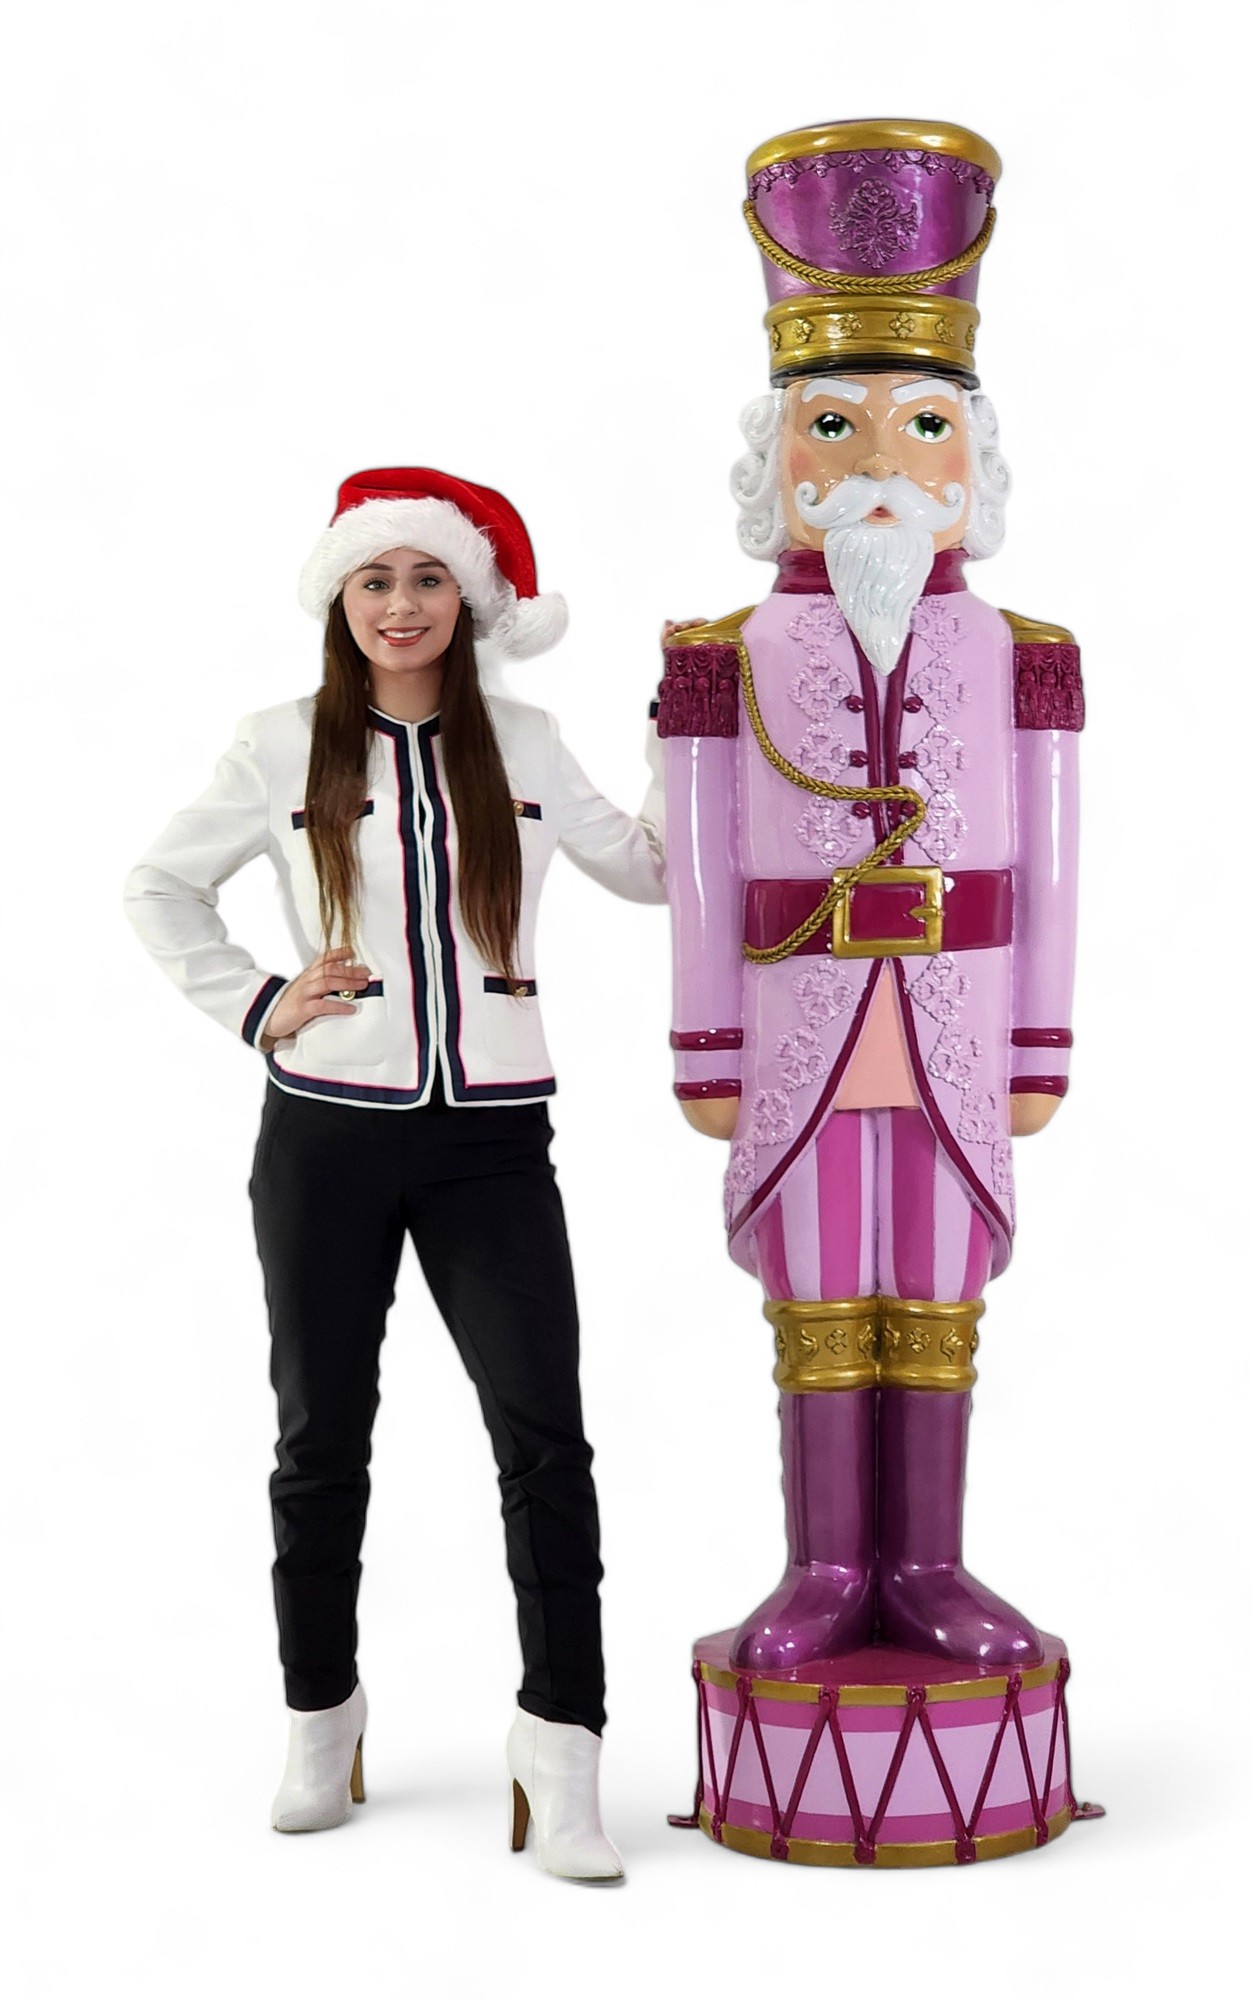 Large Nutcracker Statue Christmas Decor 6.5 FT in Pastel Pink